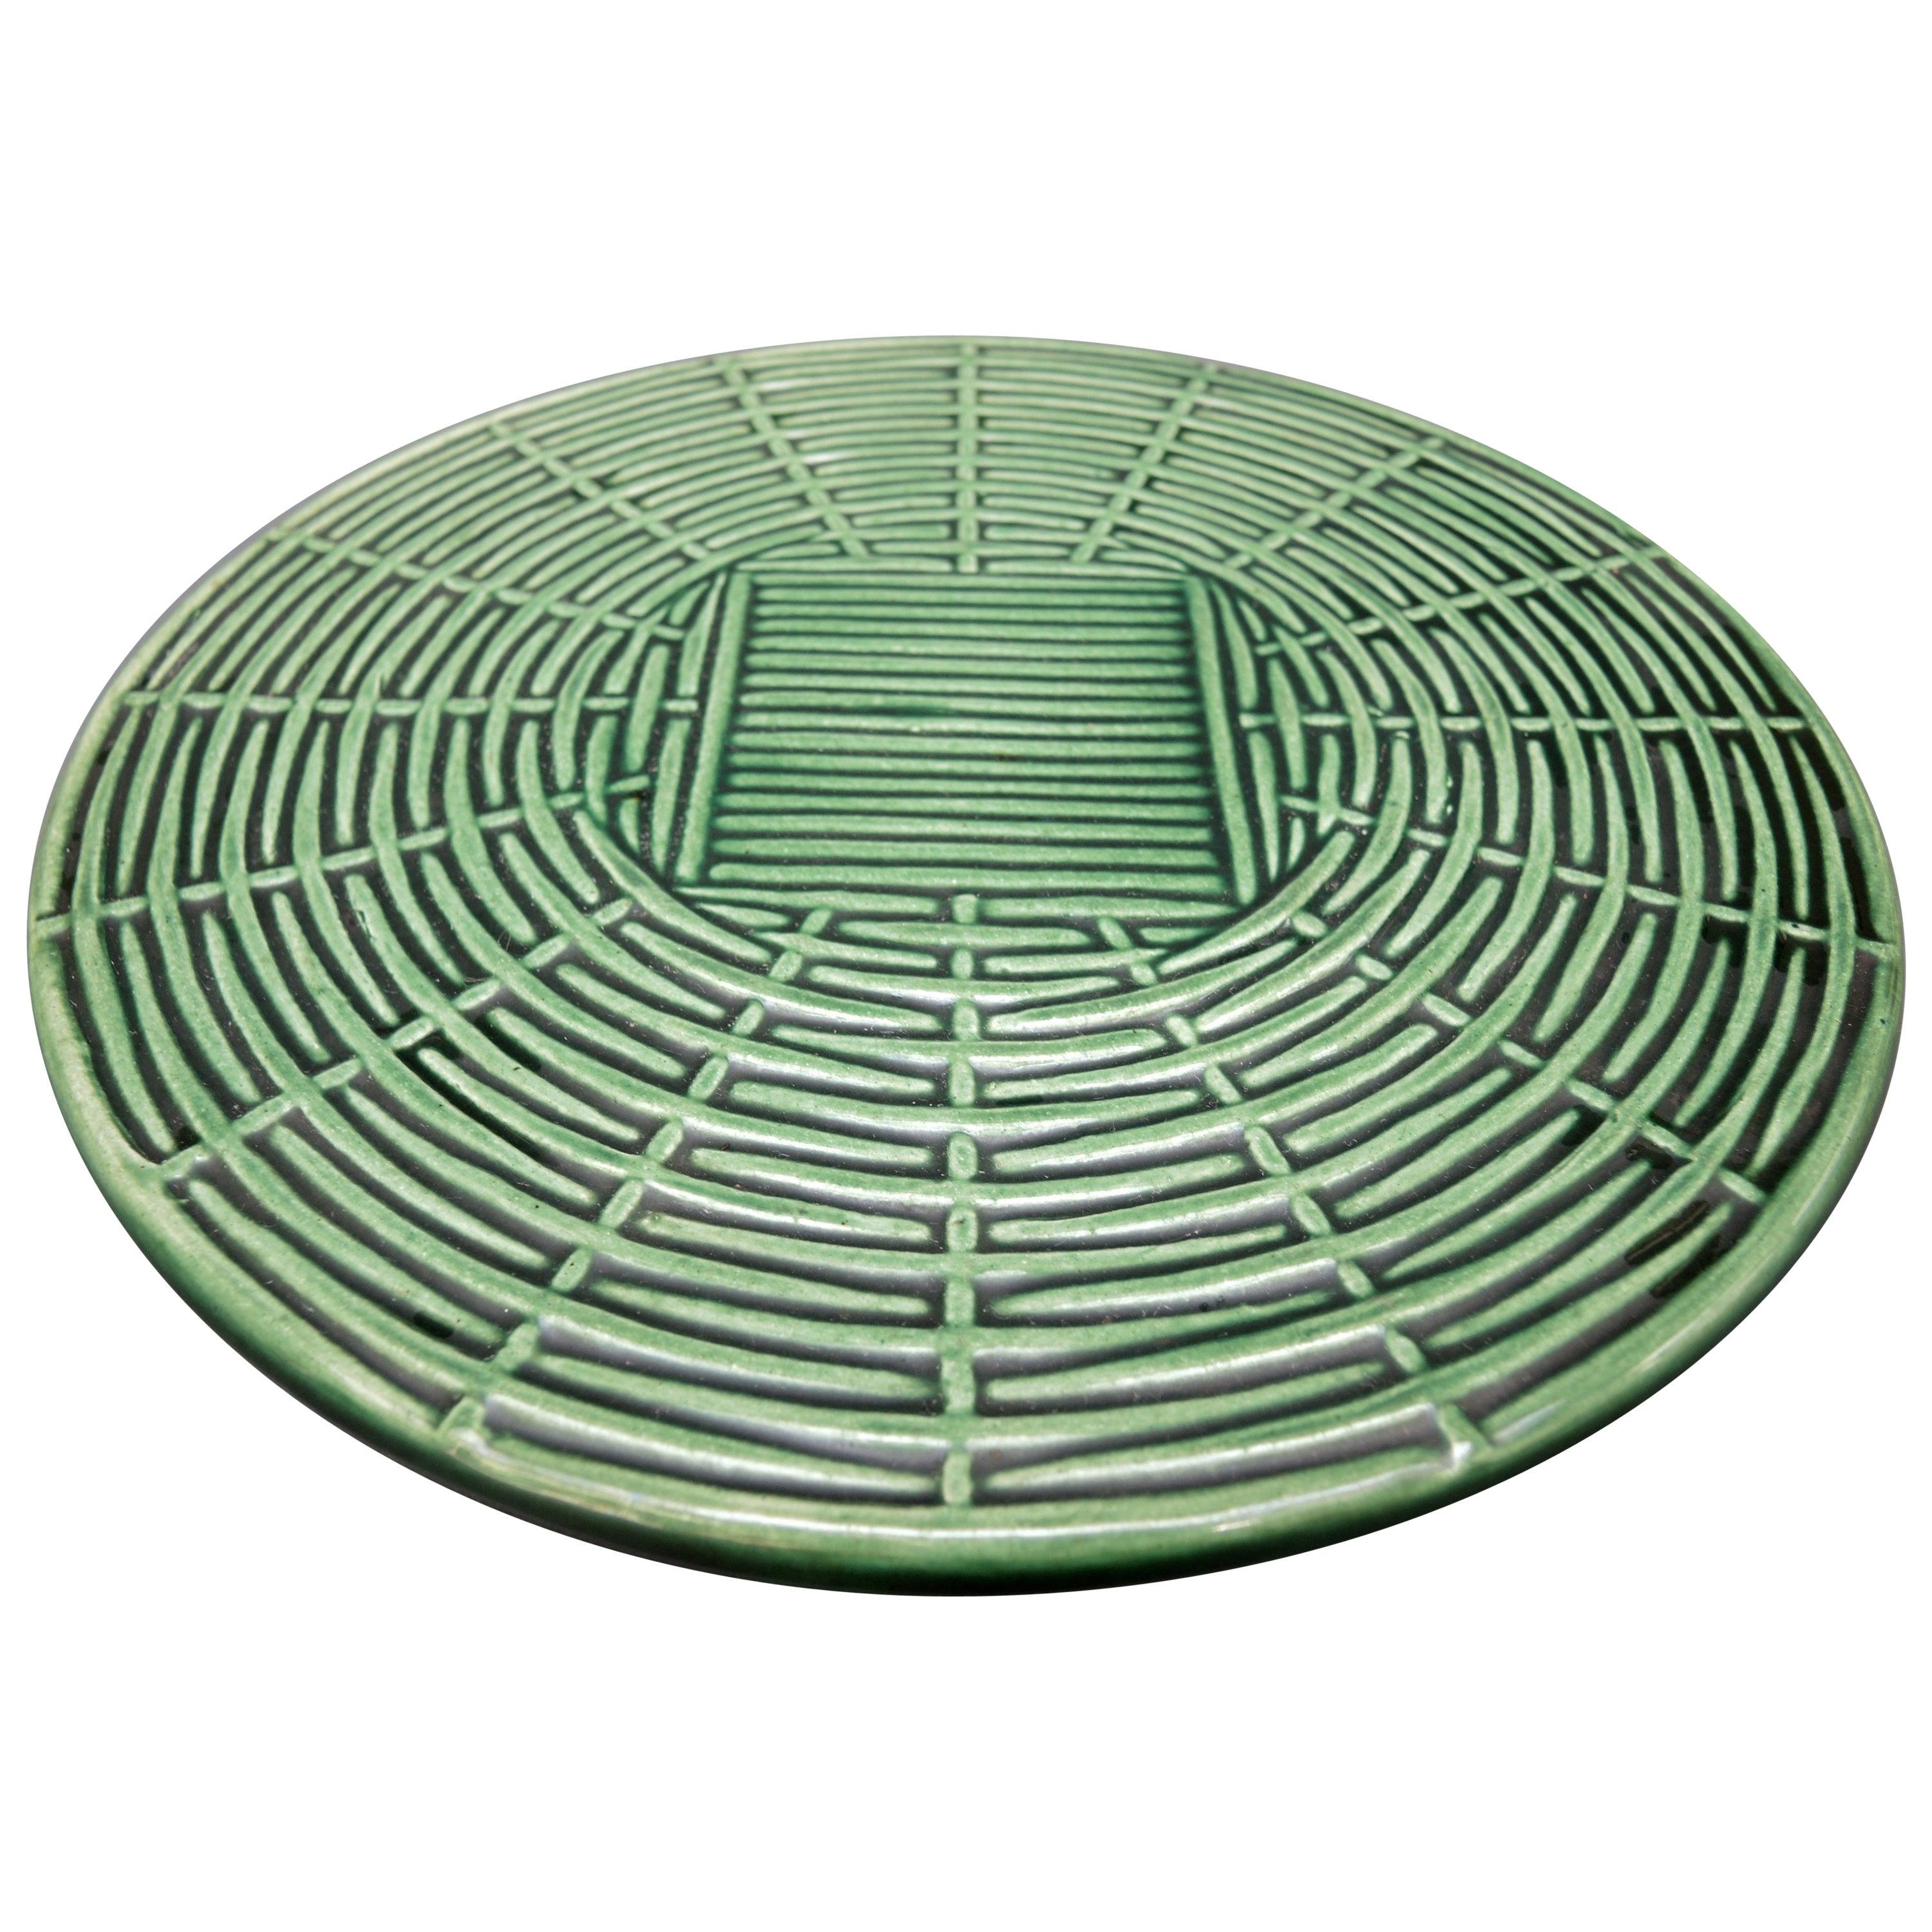 Belgian Faience Green Glazed Cheese or Tart Serving Plate in a Woven Form For Sale